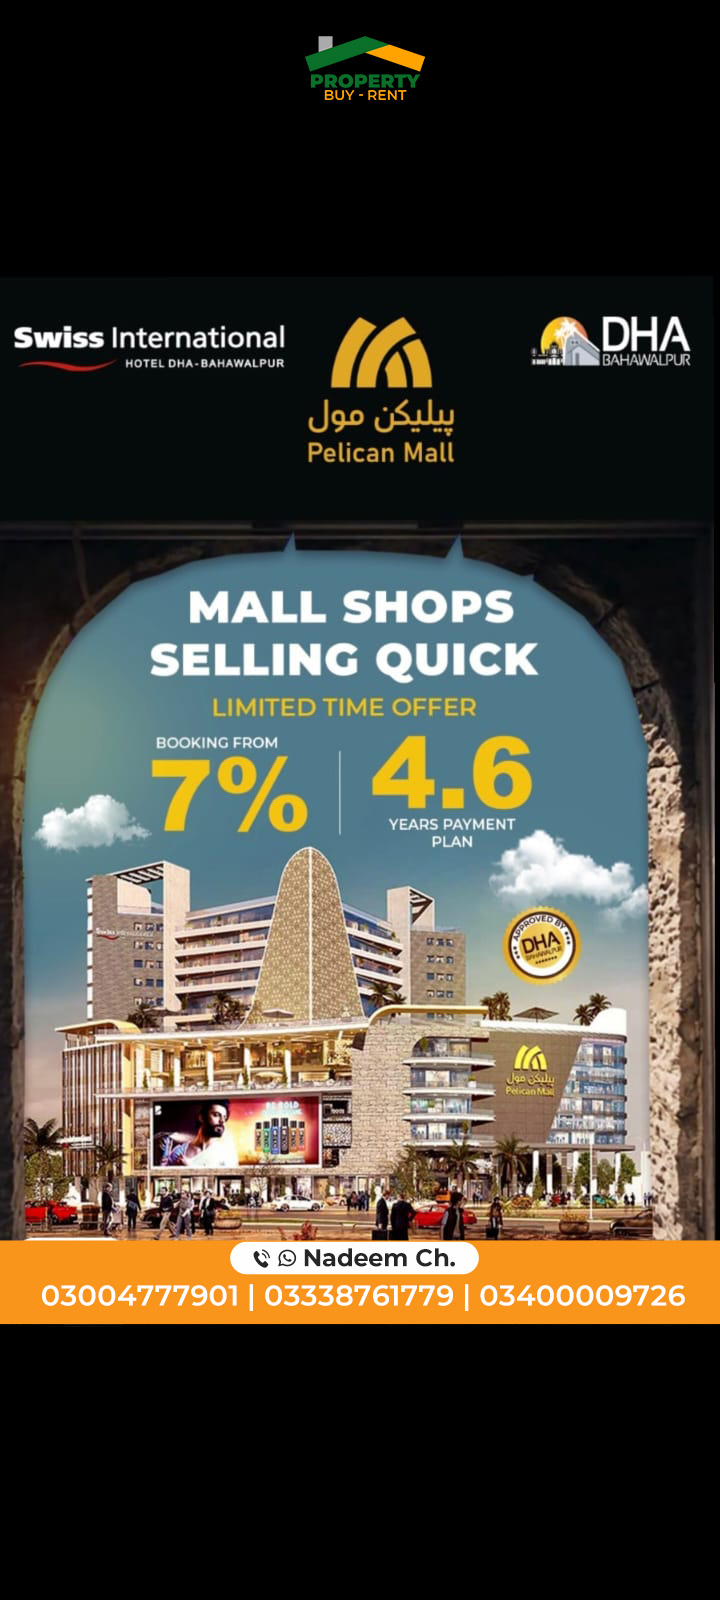 Palican Mall DHA Payment Plan